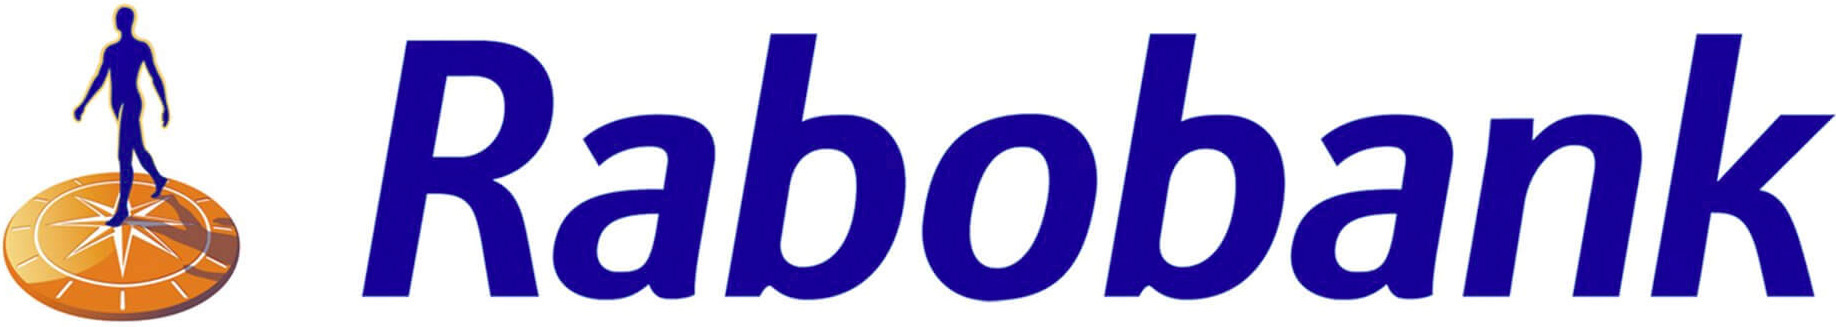 rabobank-logo-picture